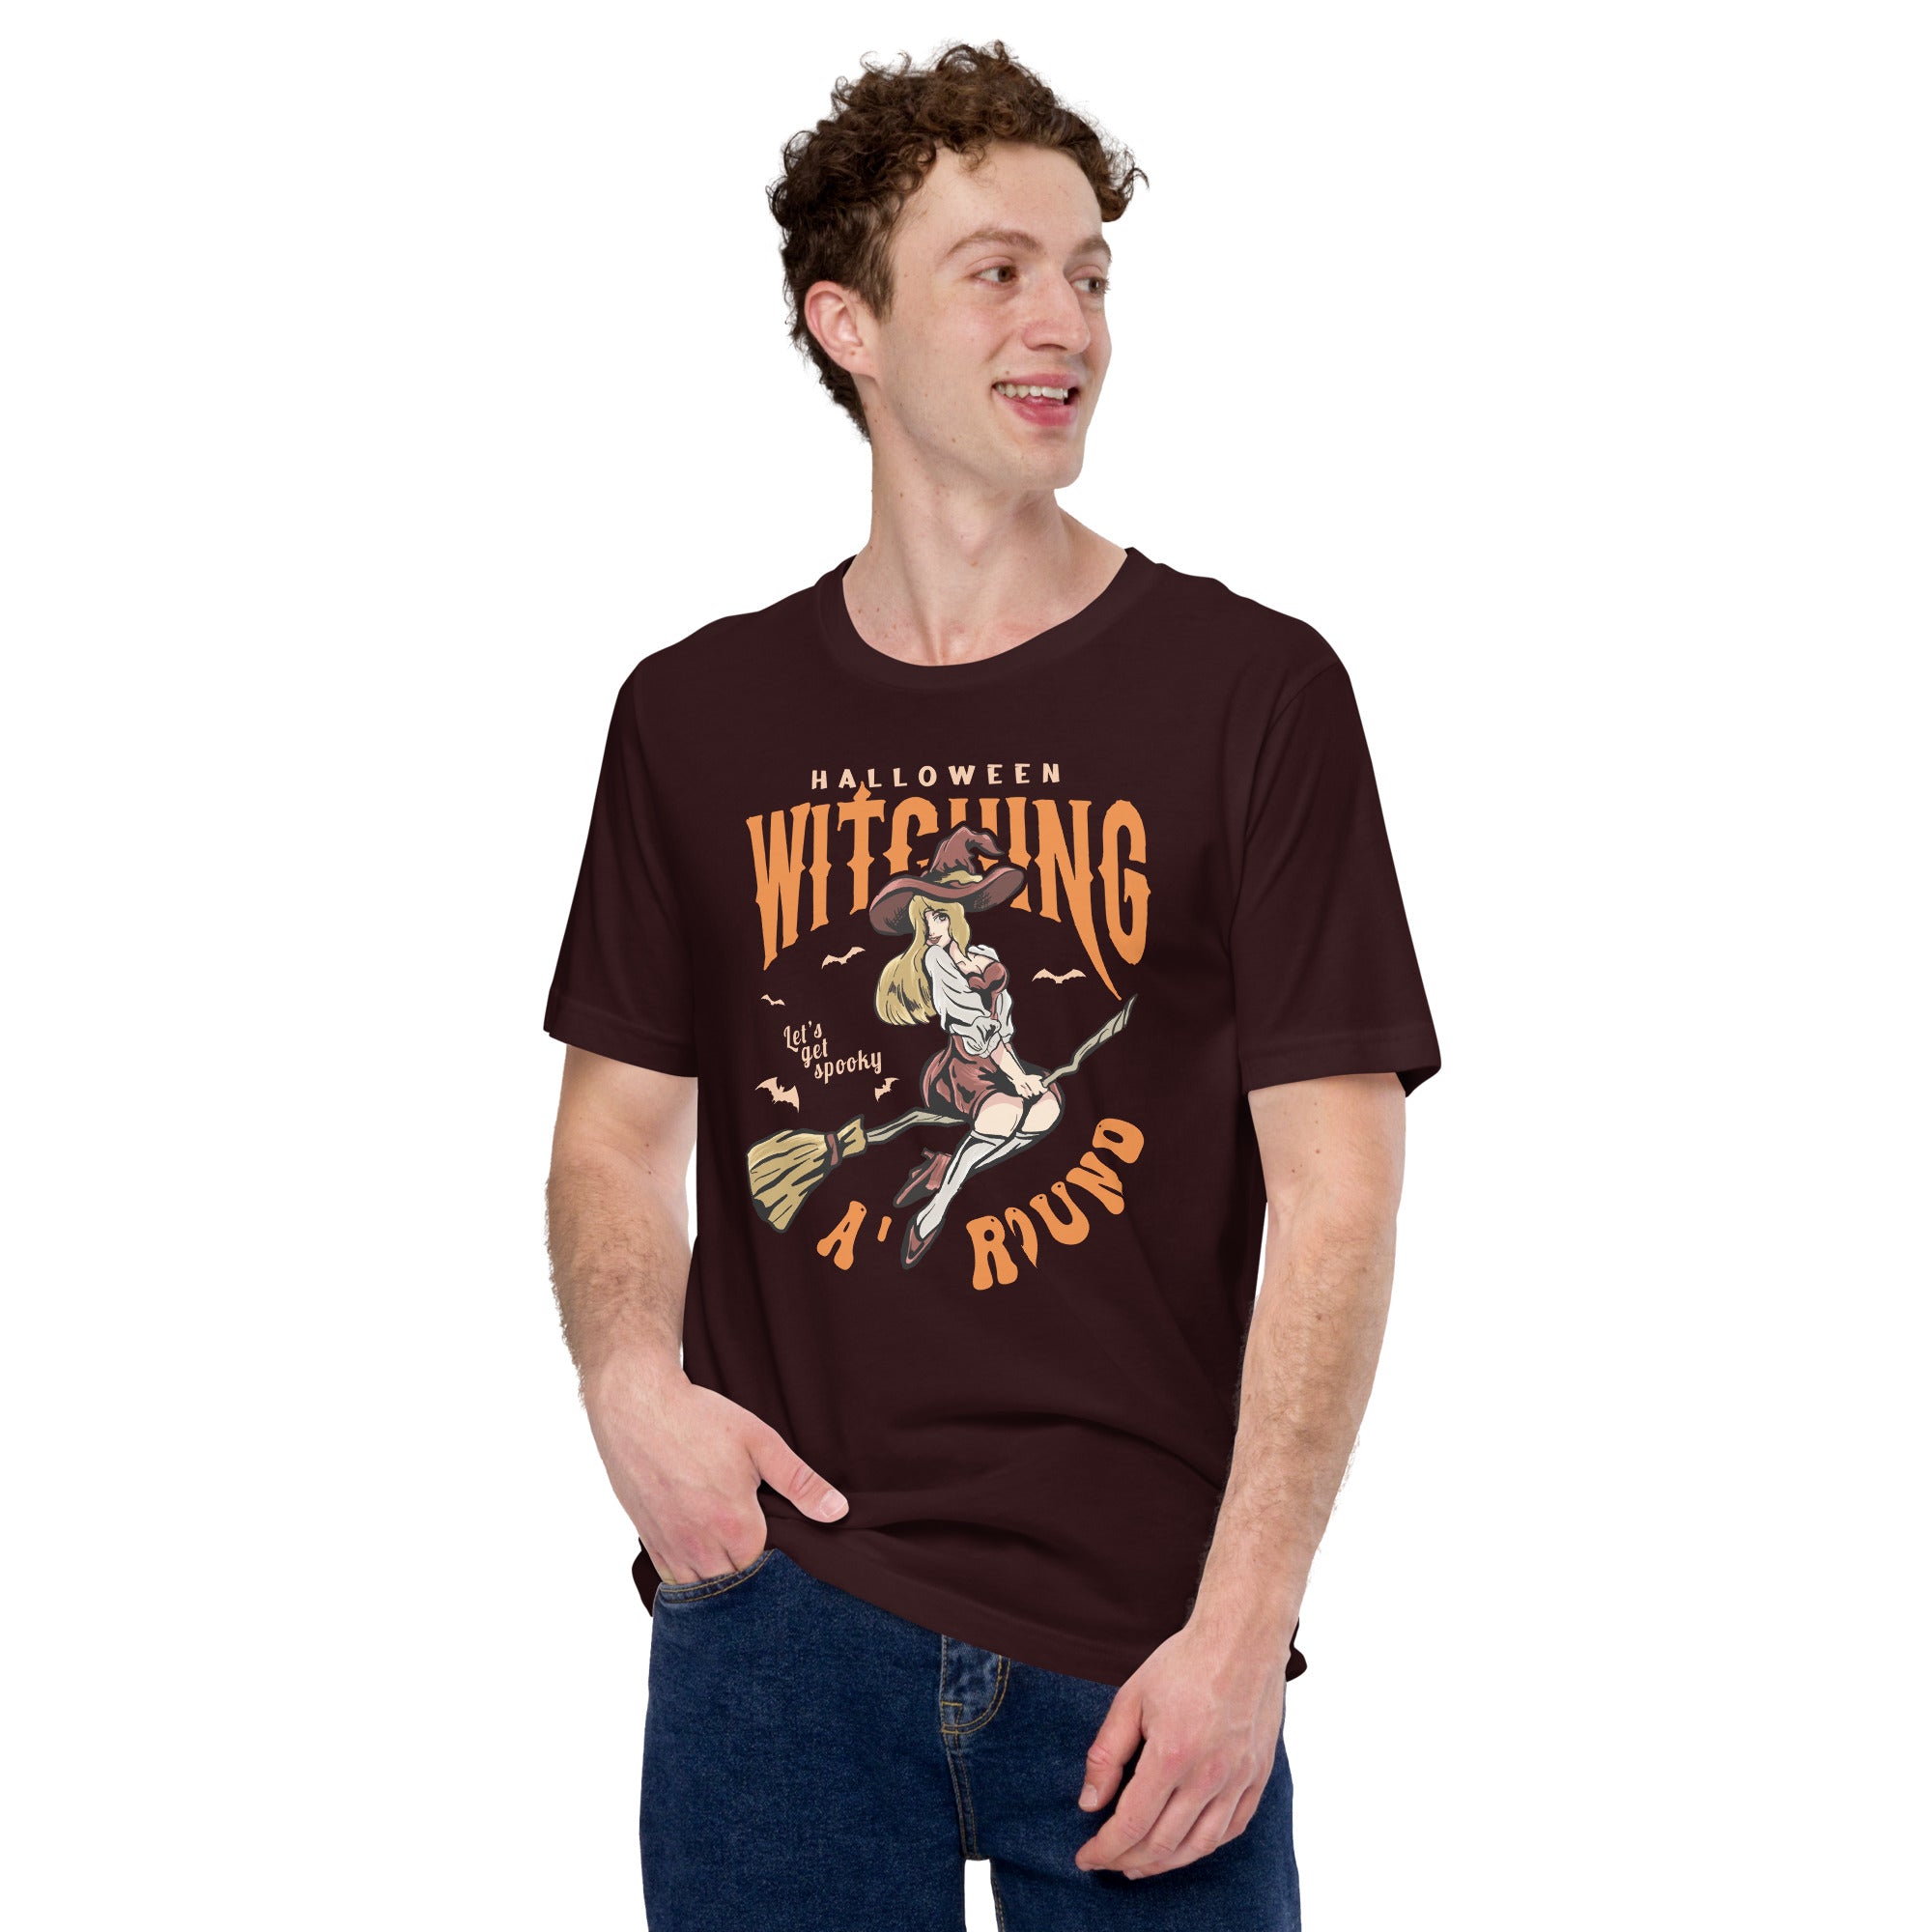 Witching A Round Unisex t-shirt